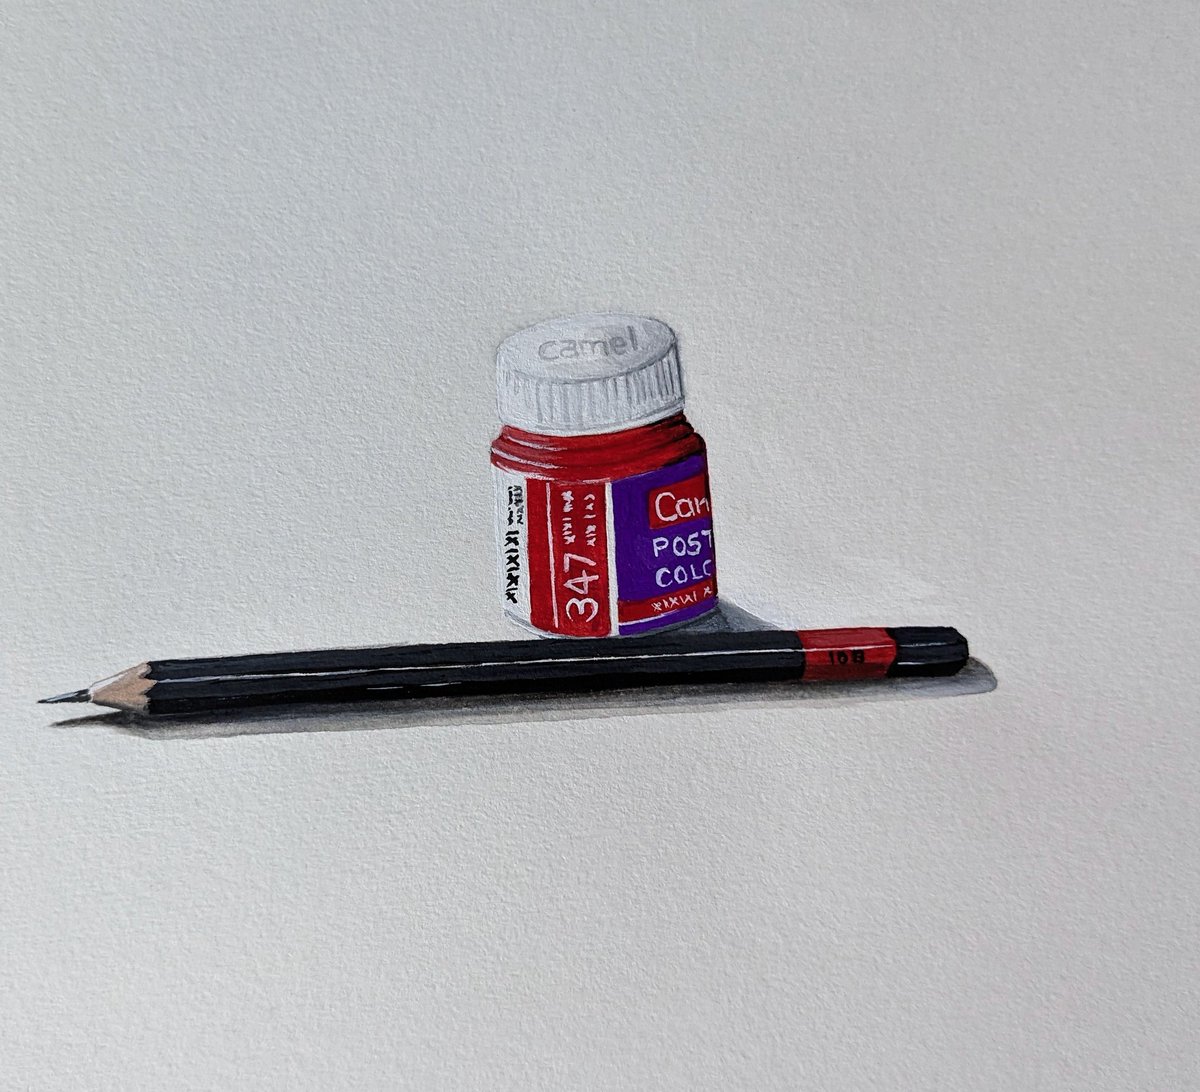 Realistic painting #object_drawing #stillife #painting #colorartideas